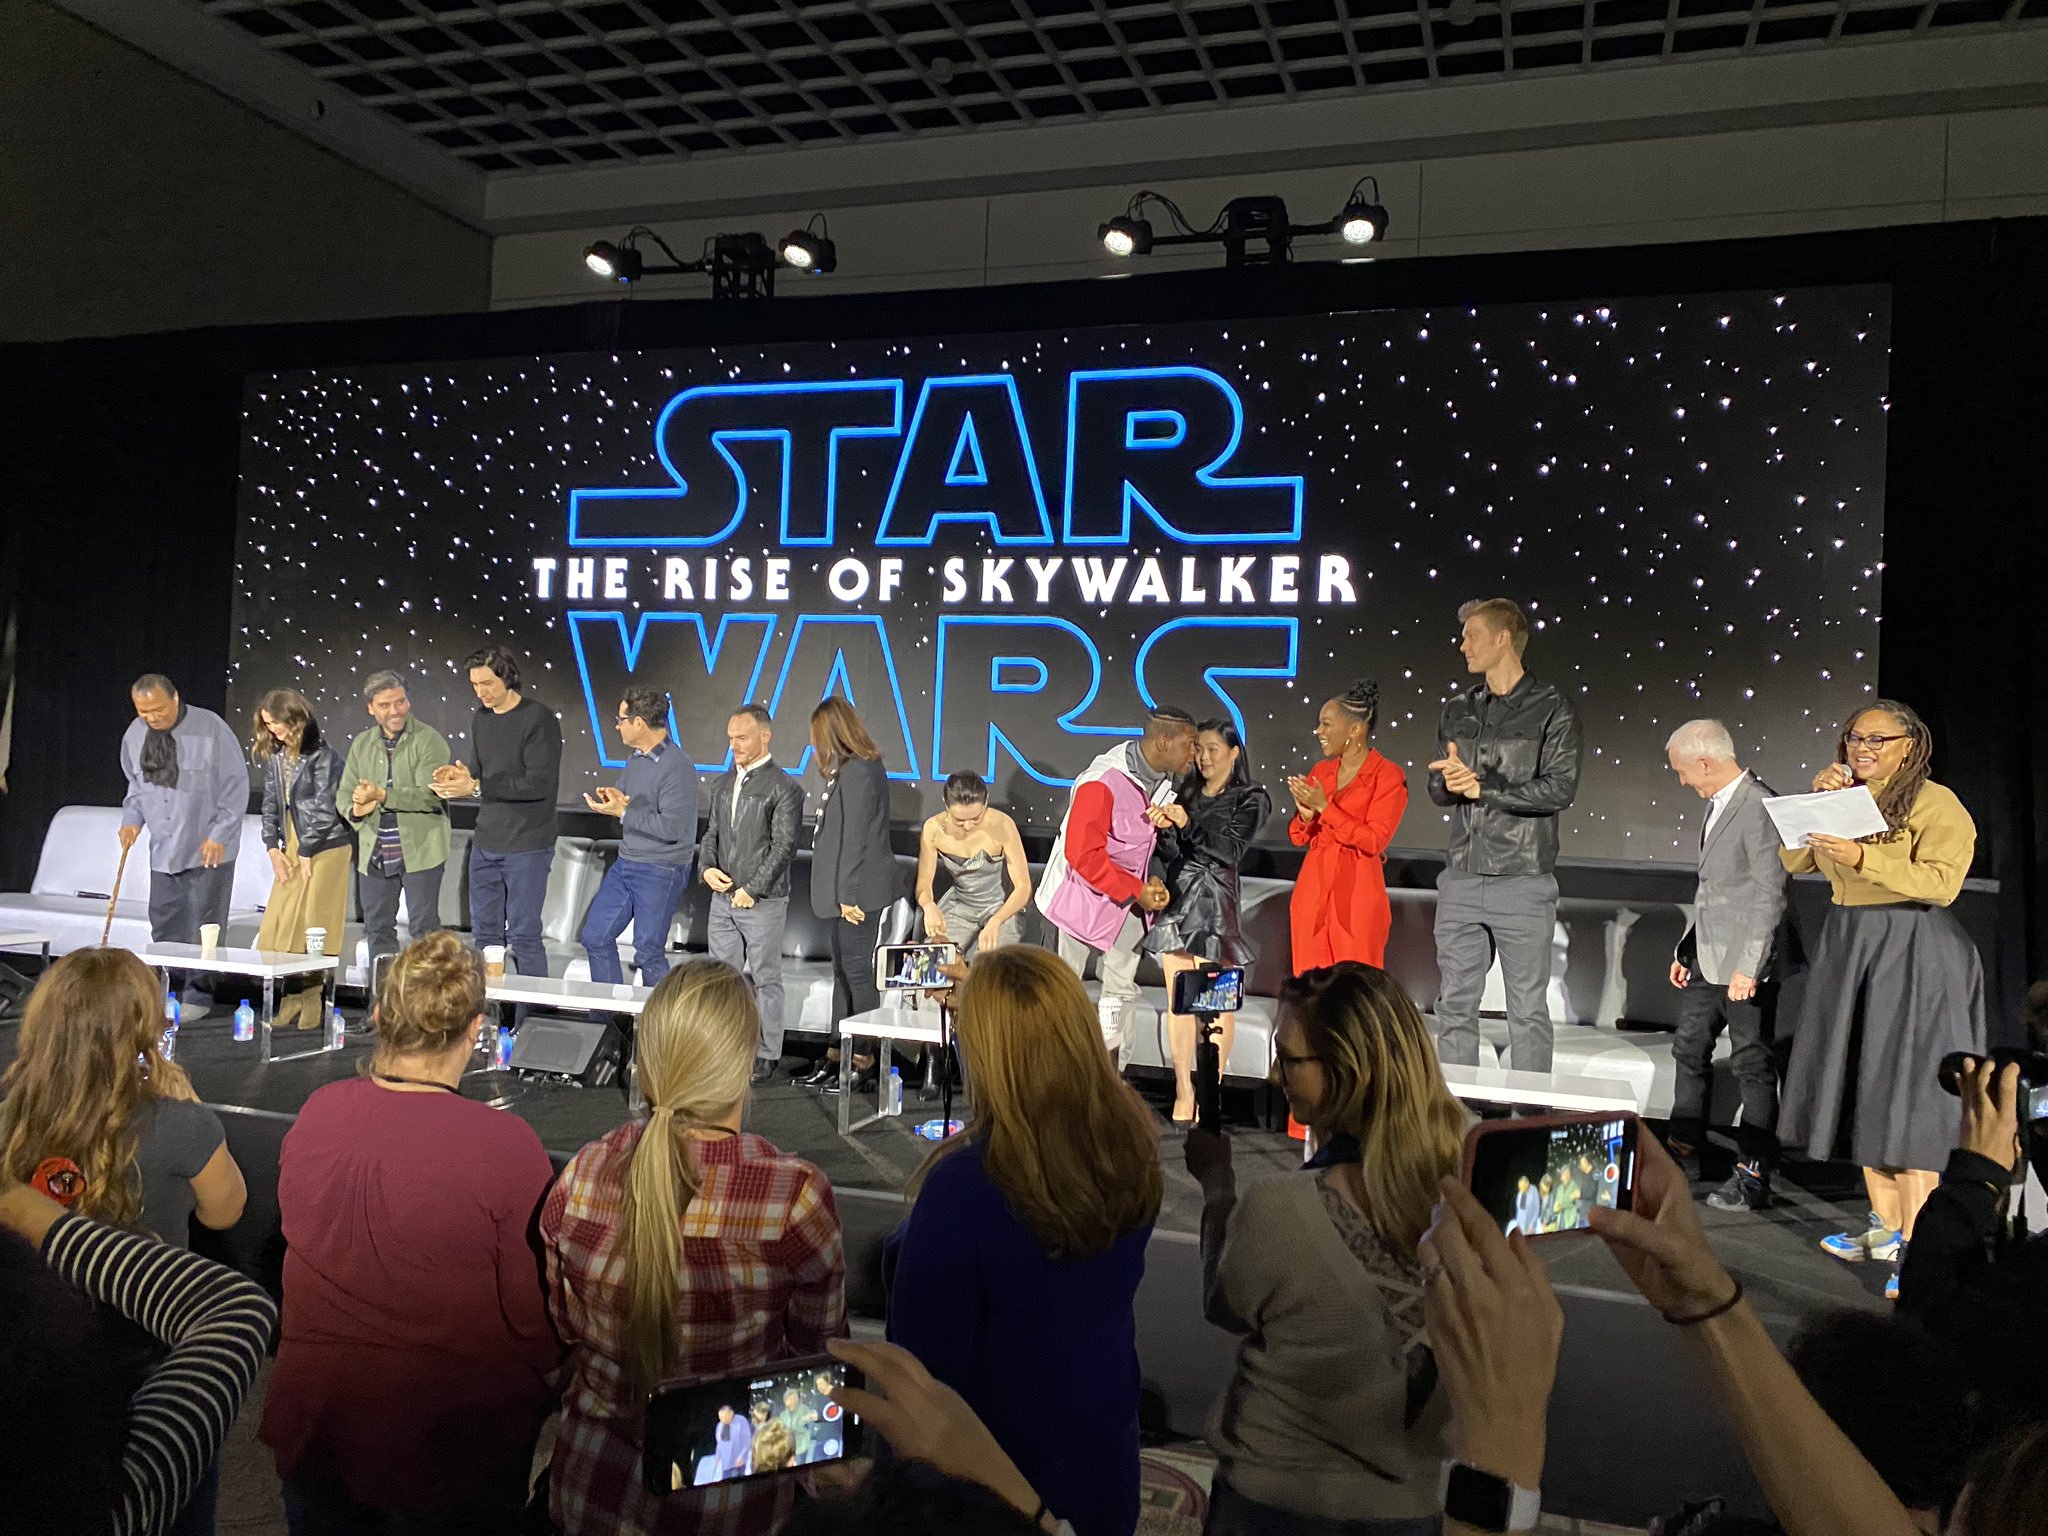 Our Coverage of Star Wars The Rise of Skywalker's Global Press